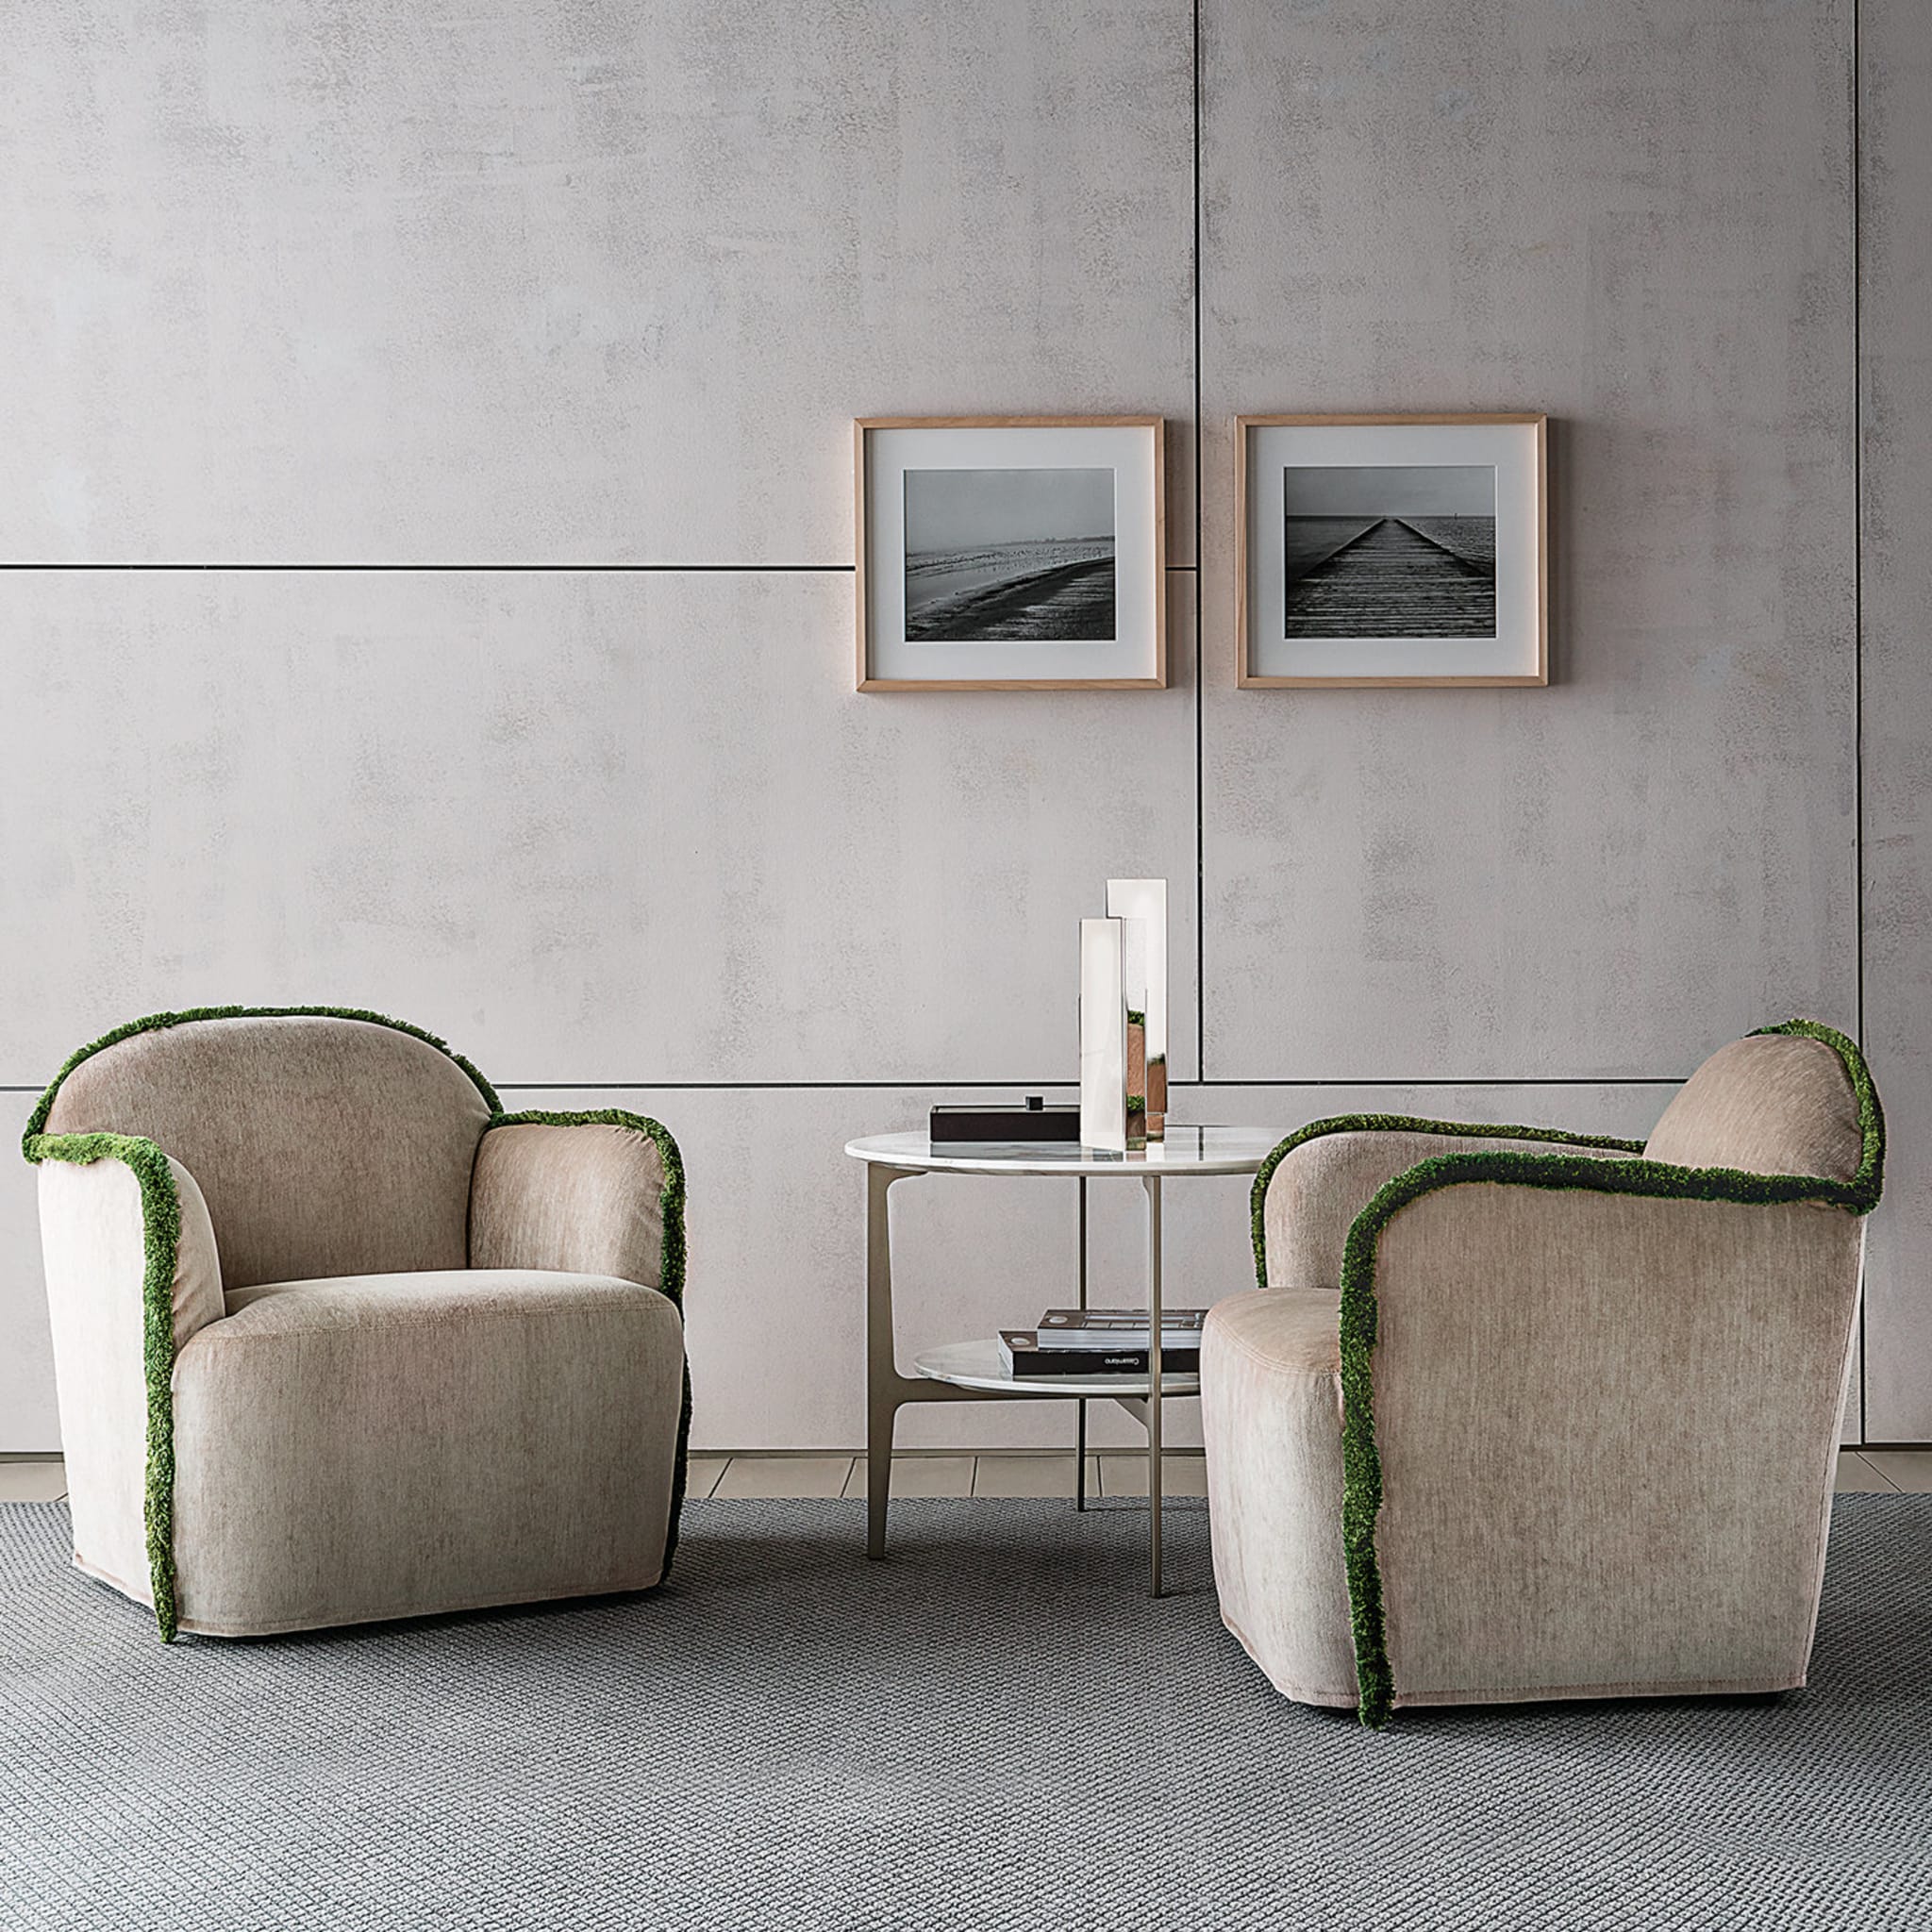 Ada Cream Armchair with Green Piping by Paola Navone - Alternative view 1